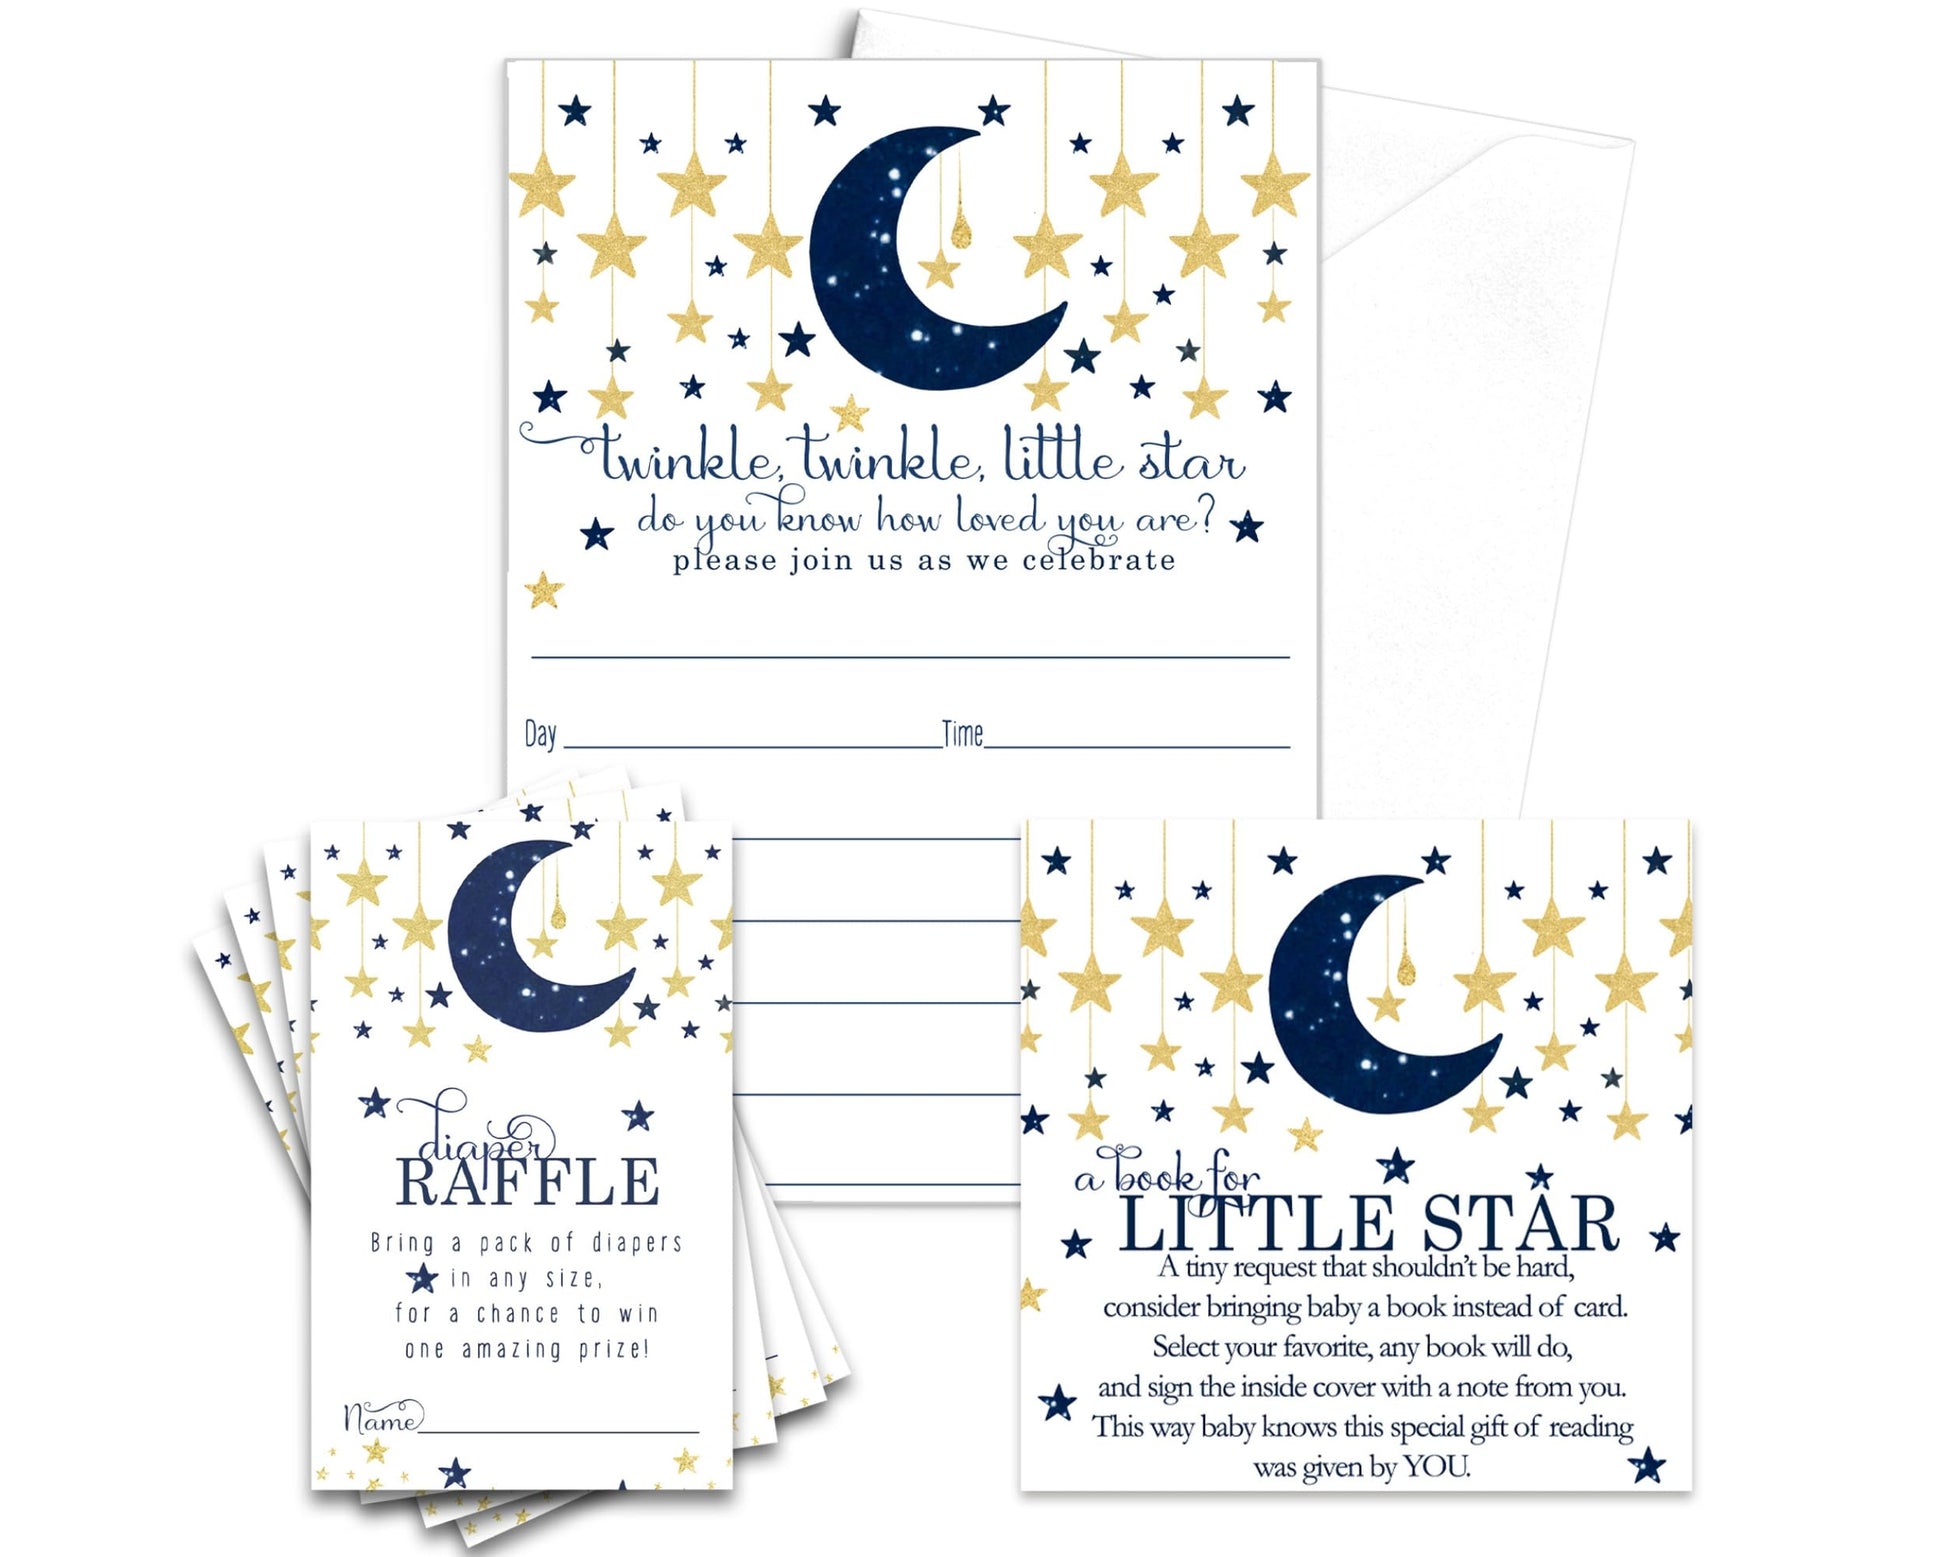 Star Baby Shower Invitation Bundle (25Paper Clever Party